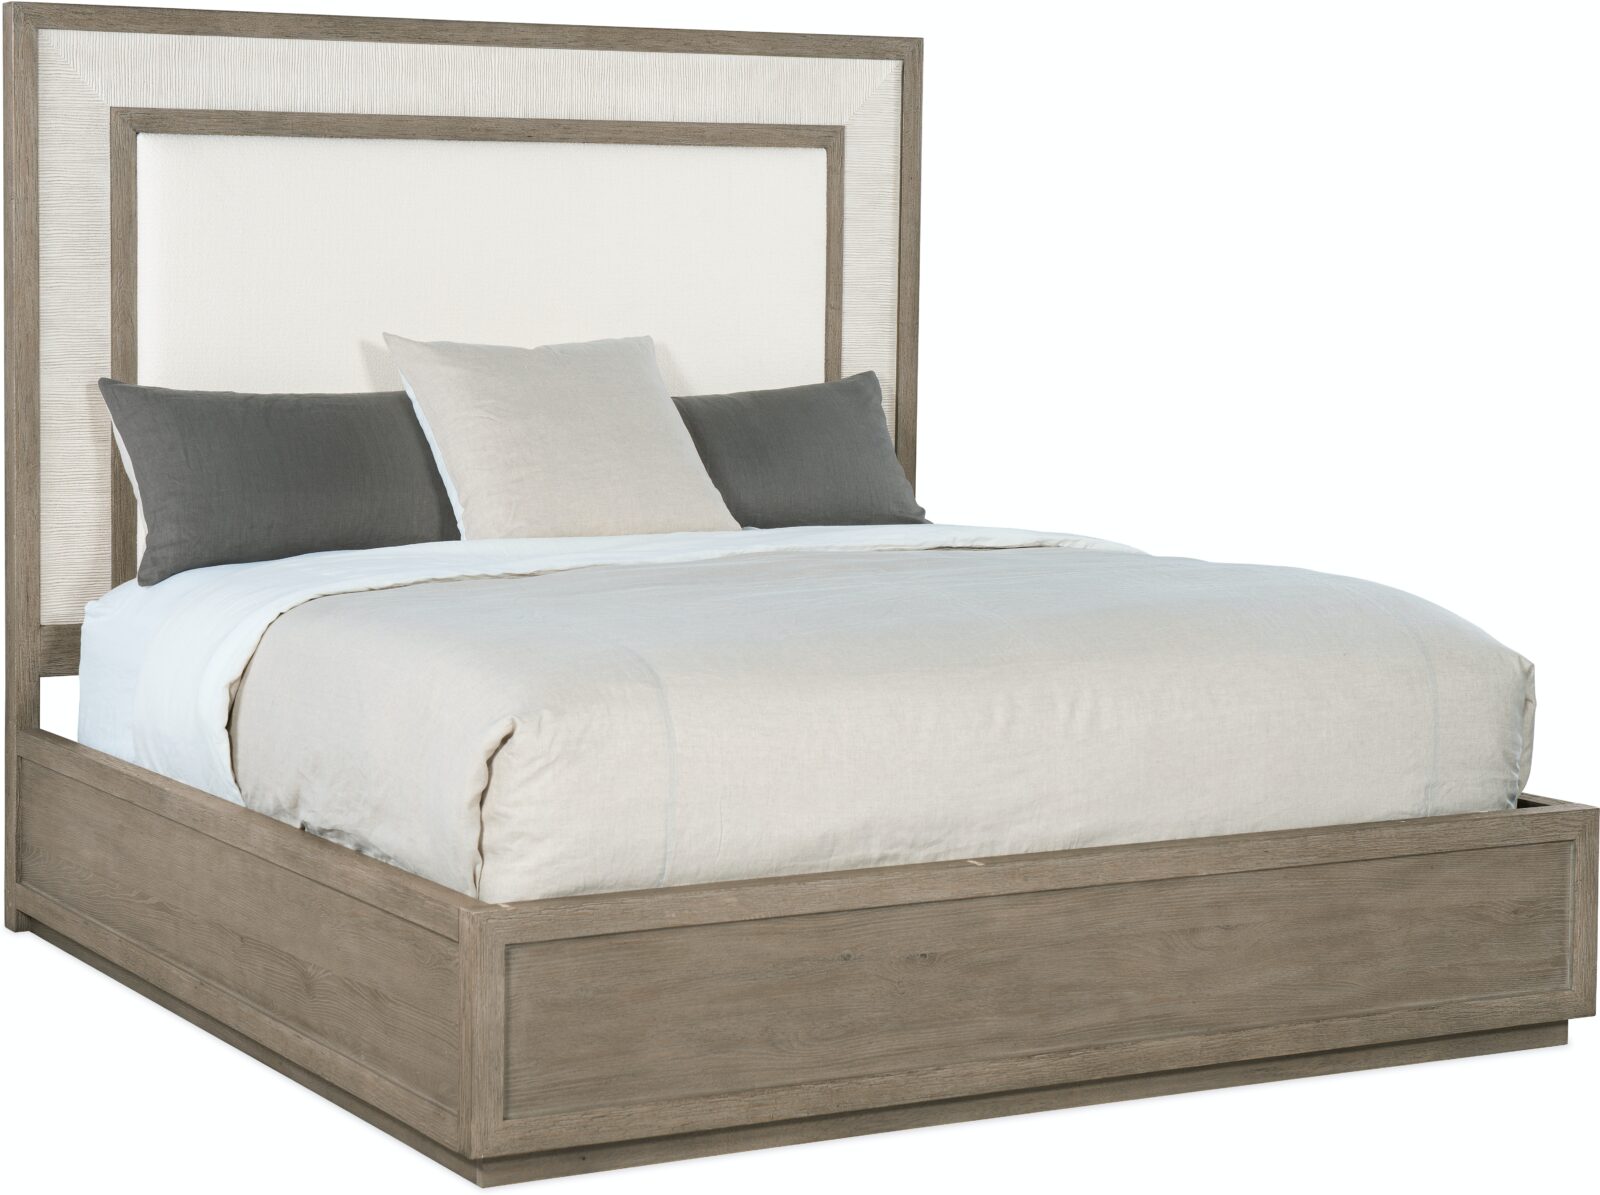 Serenity Rookery upholstered bed